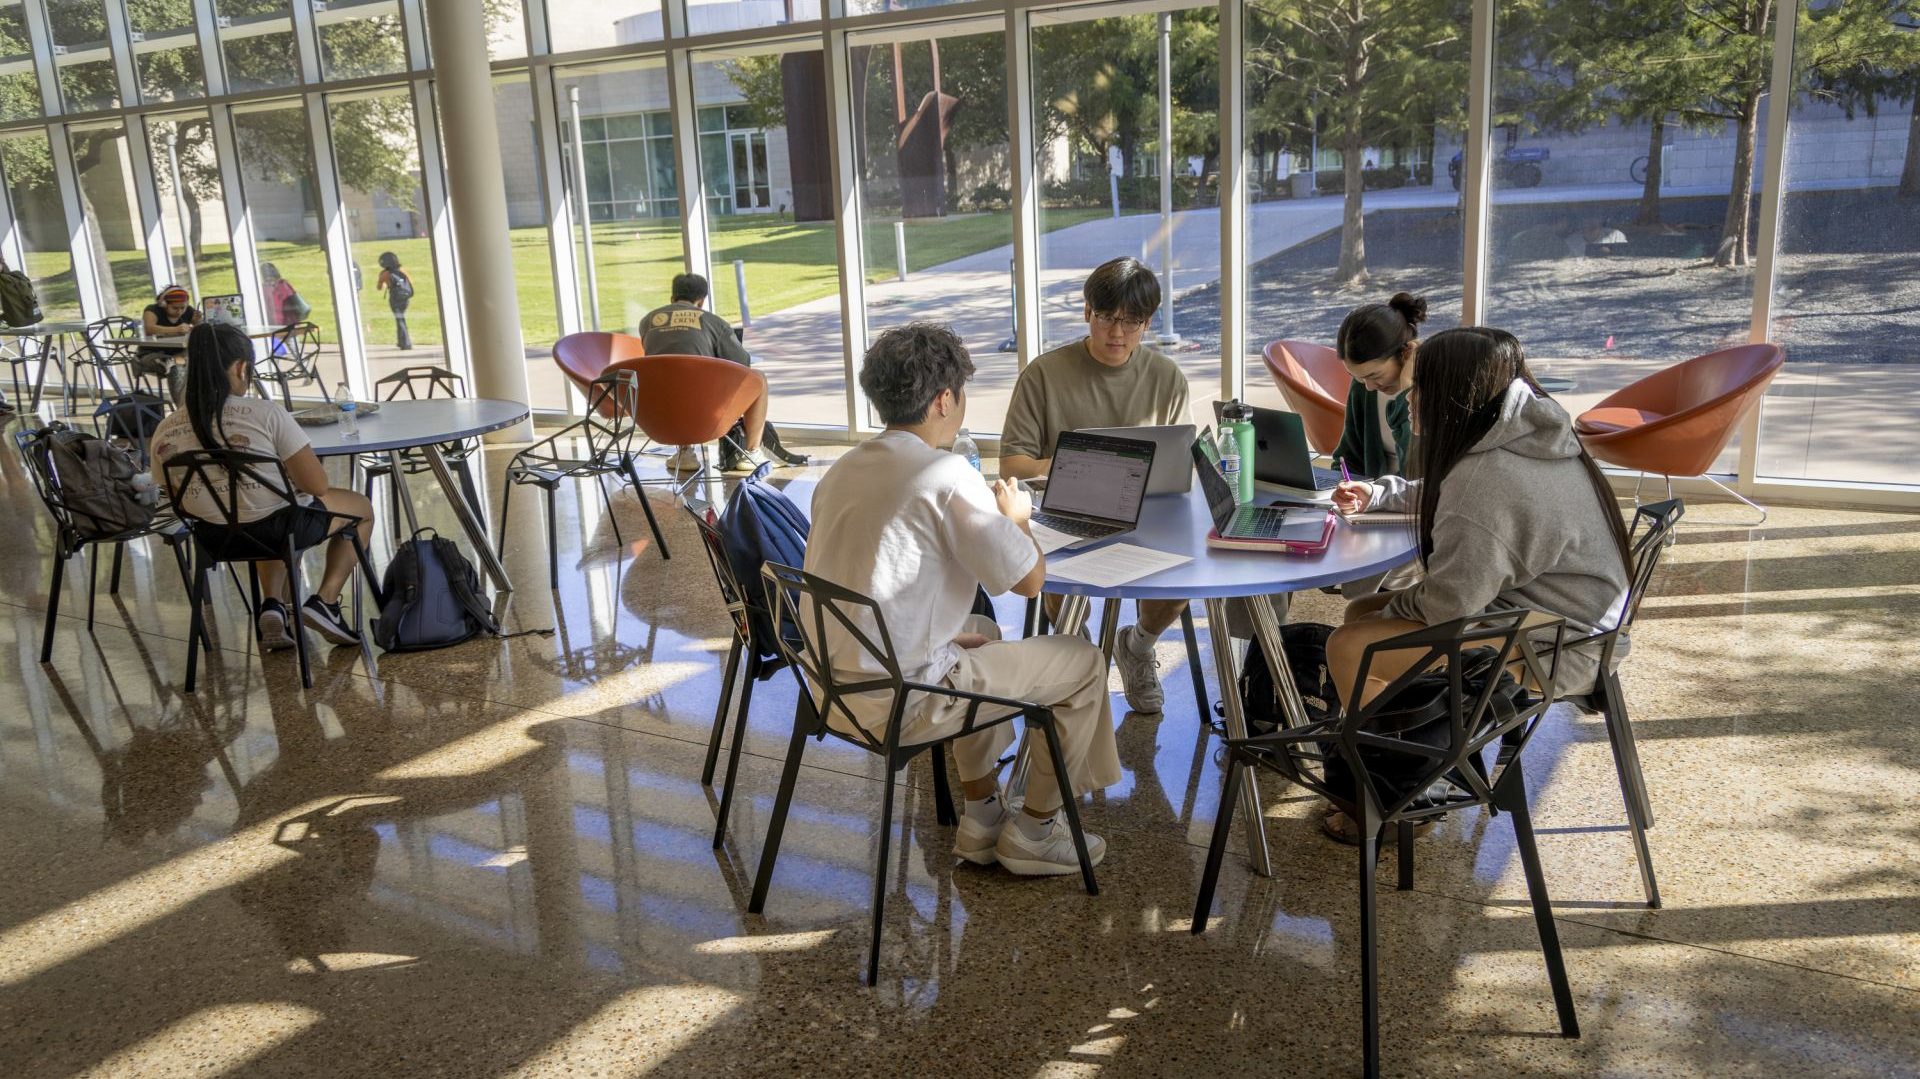 Students sitting together at various tables in the Student Union